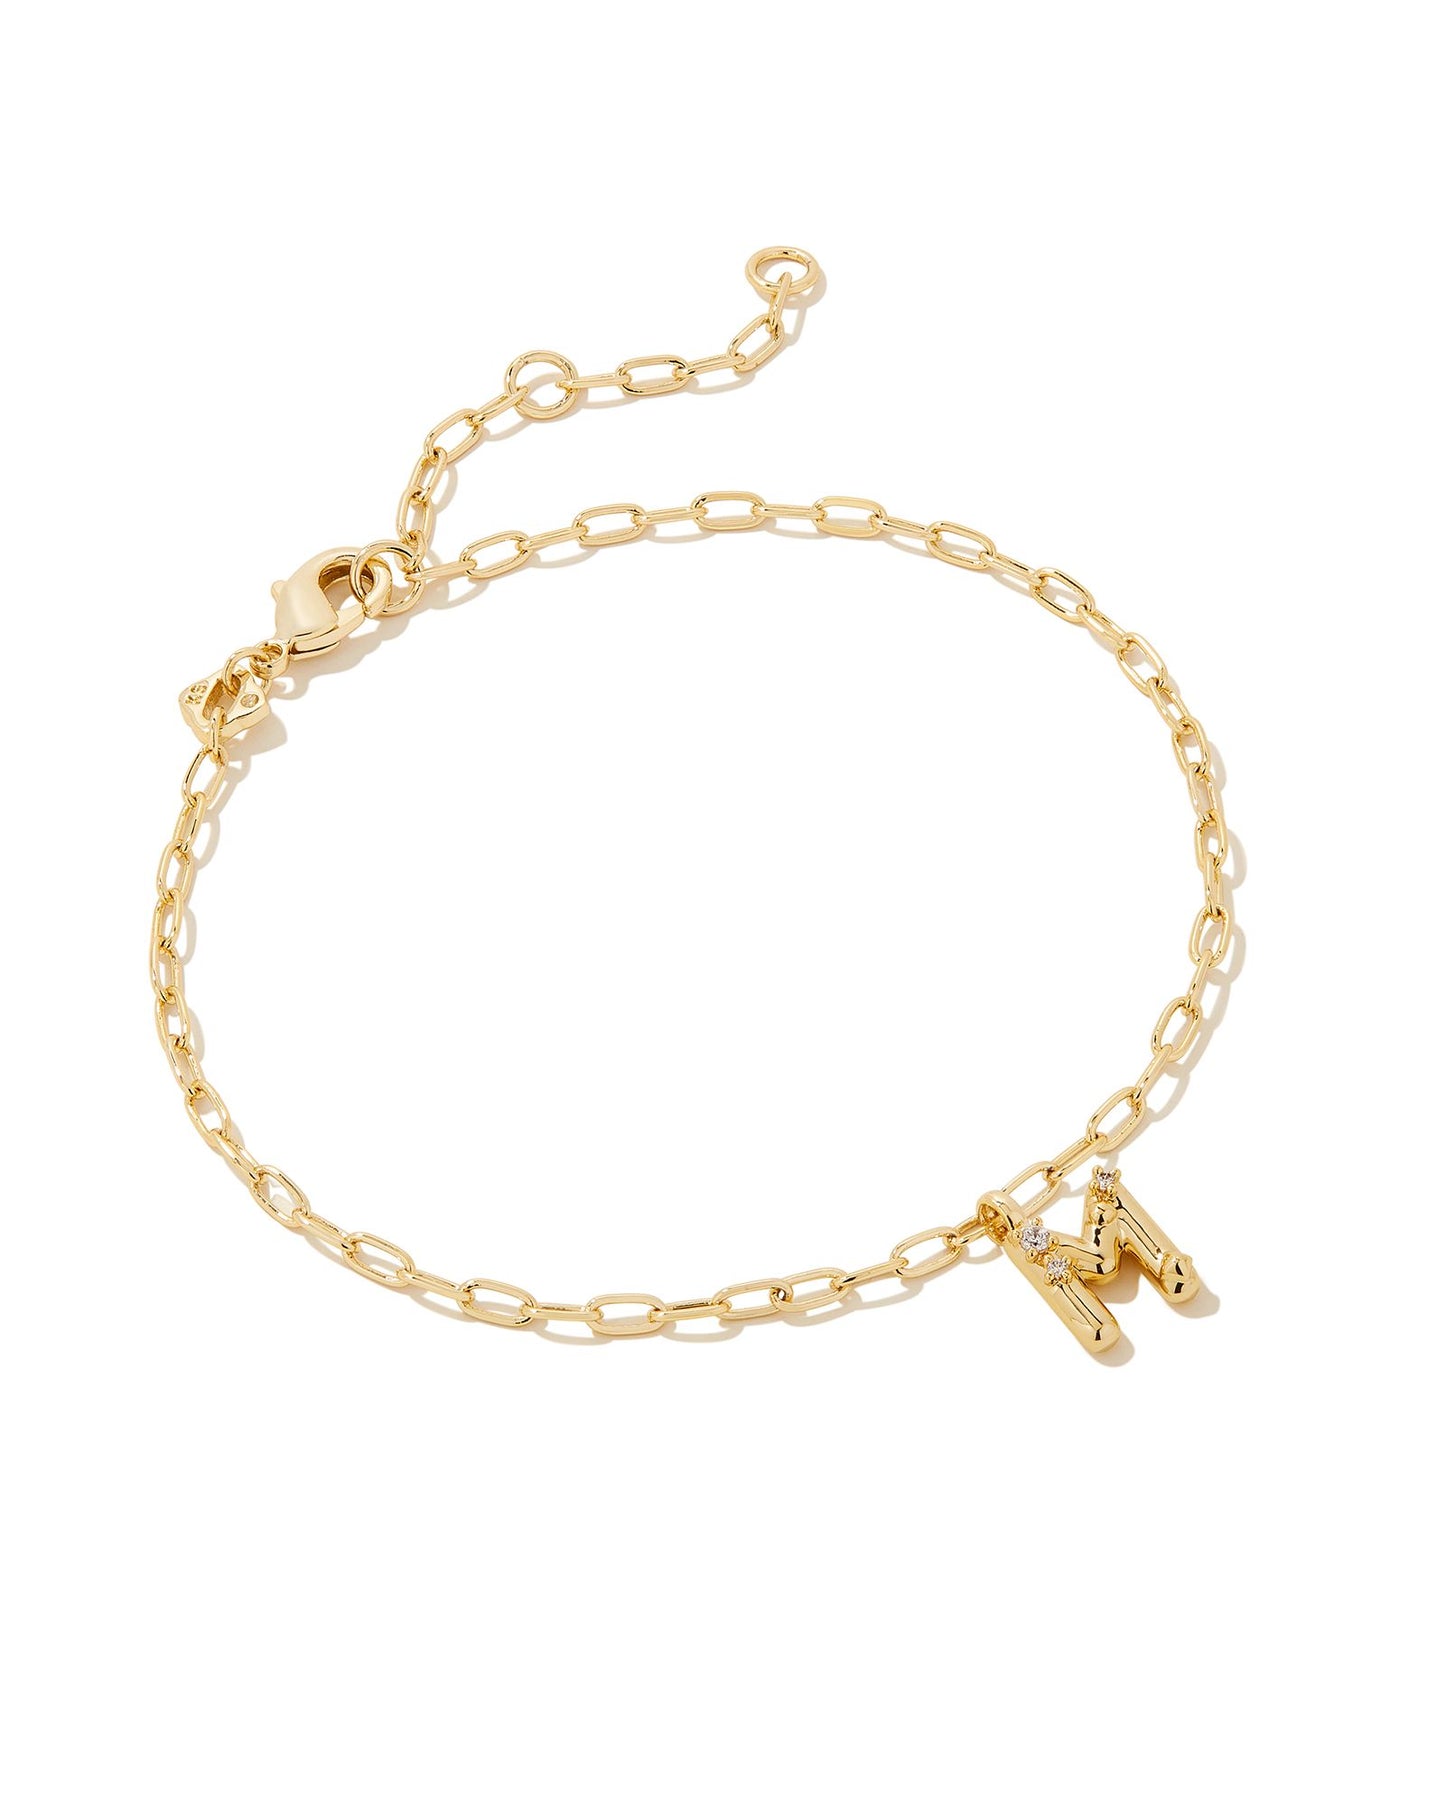 Add a personal touch to your wrist stack with the Crystal Delicate Chain Bracelet in White Crystal, our first Fashion Jewelry initial bracelet. Featuring a dainty chain and letter charm with a hint of sparkle, this bracelet is the perfect way to celebrate the ones you love—including yourself!  Dimensions- 6.5' CHAIN WITH 1.5' EXTENDER, 0.45'L X 0.26"W PENDANT Metal- 14K Gold plated over brass Closure- Lobster Clasp Material-  White CZ Letter M